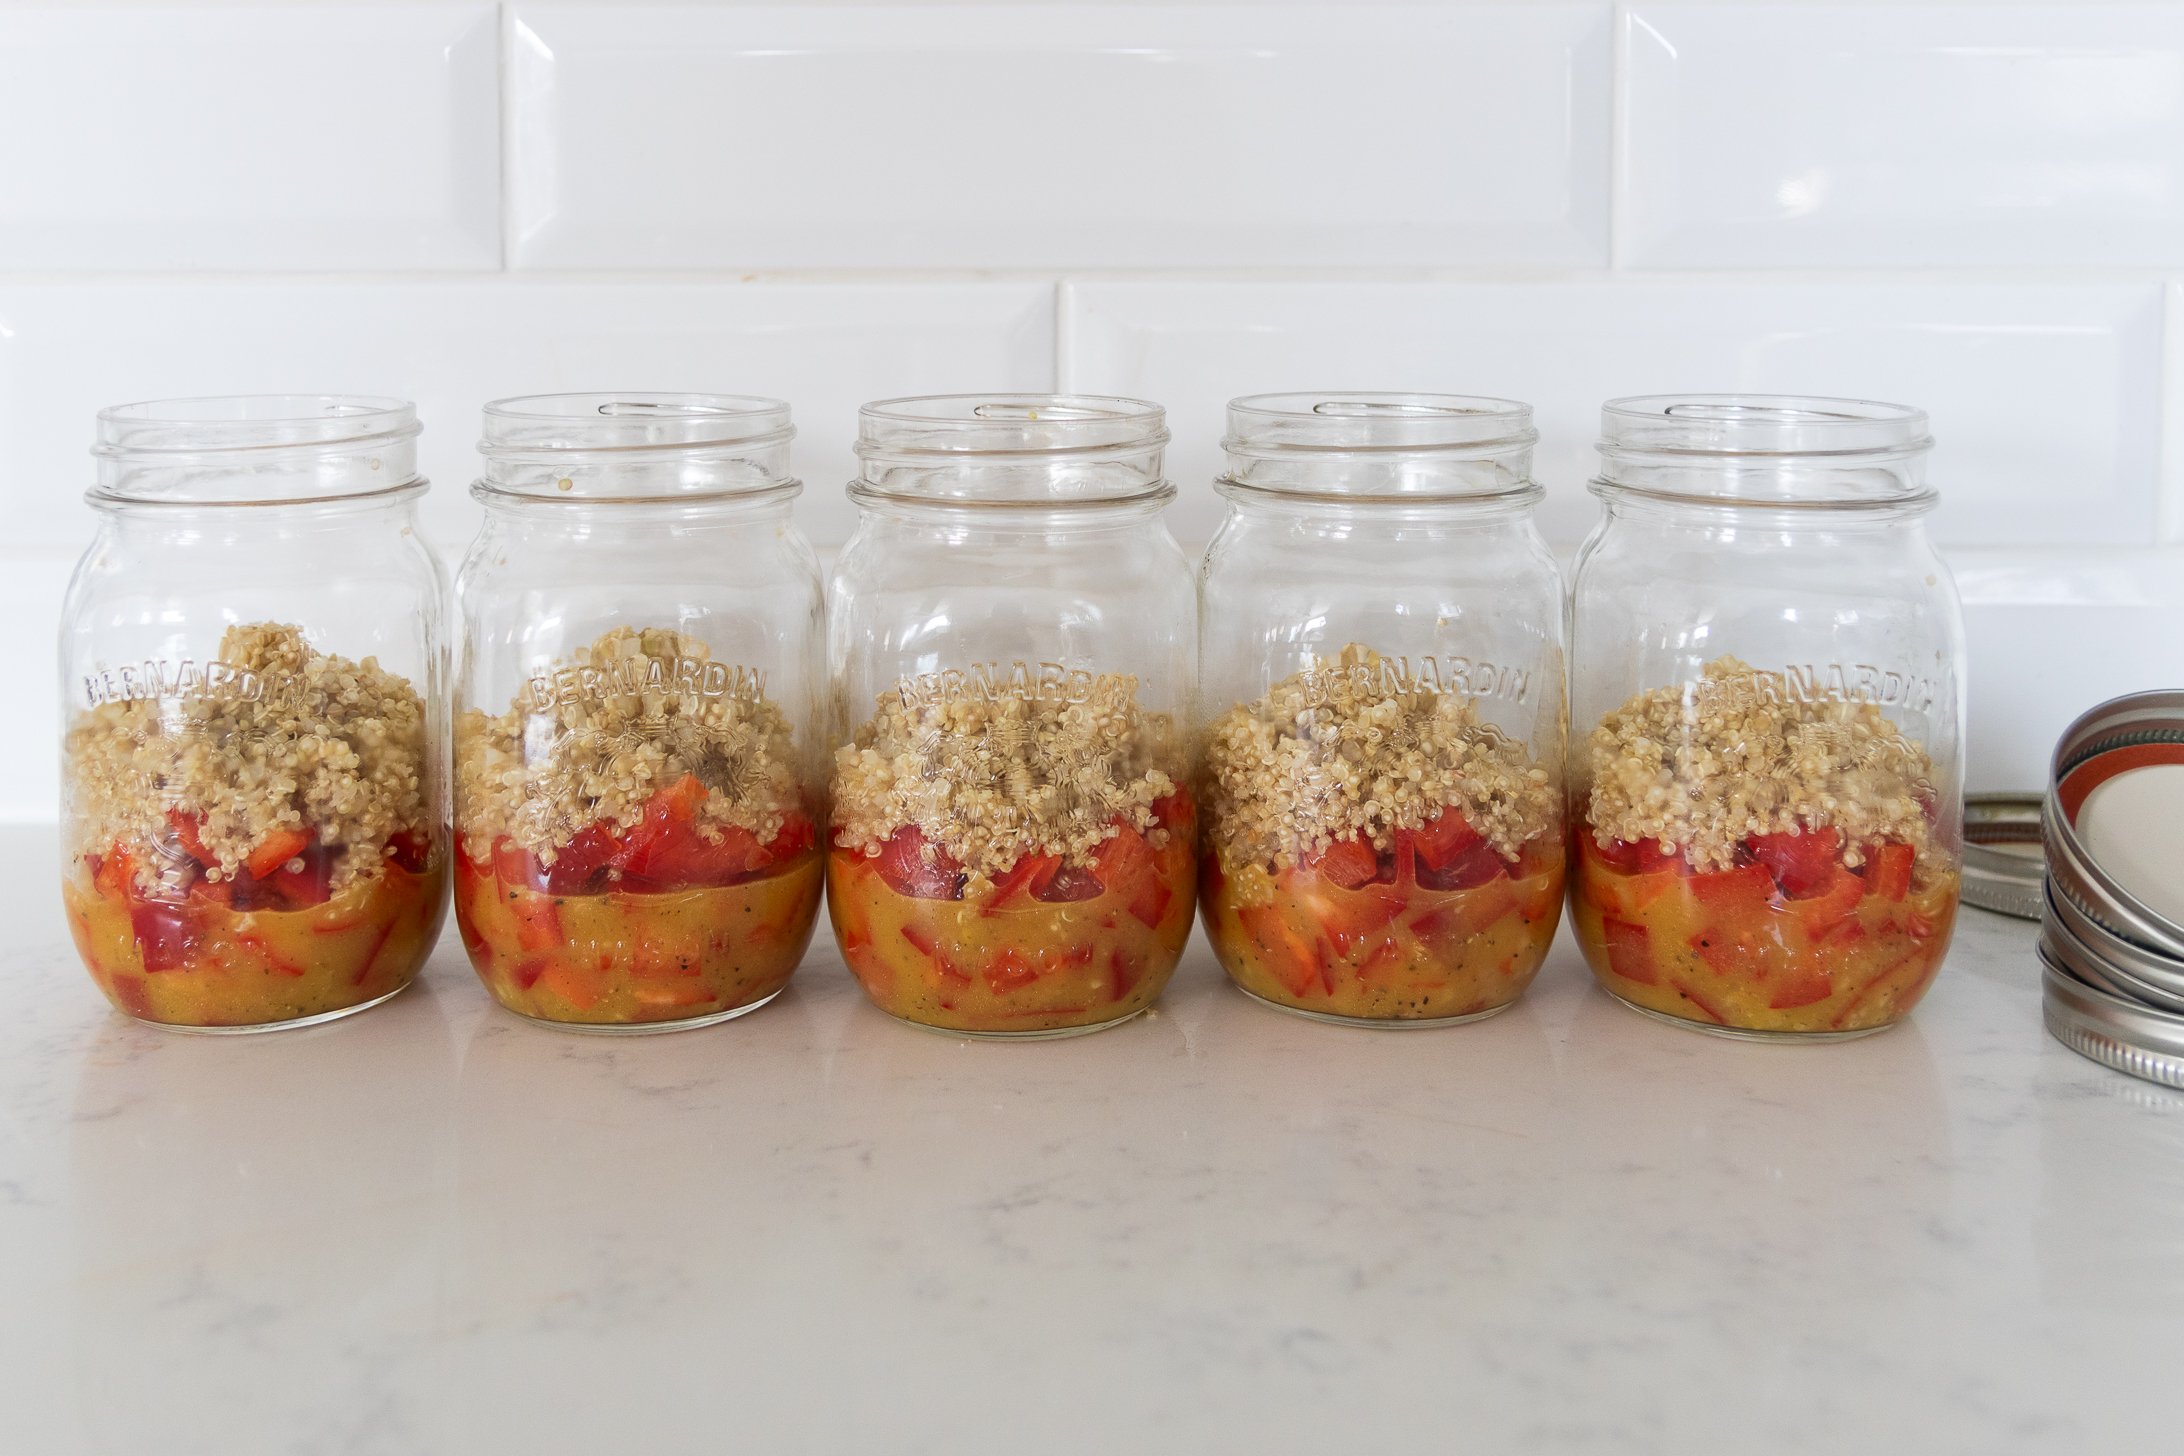 Five mason jars filled with dressing, peppers and quinoa leaning against a white background.